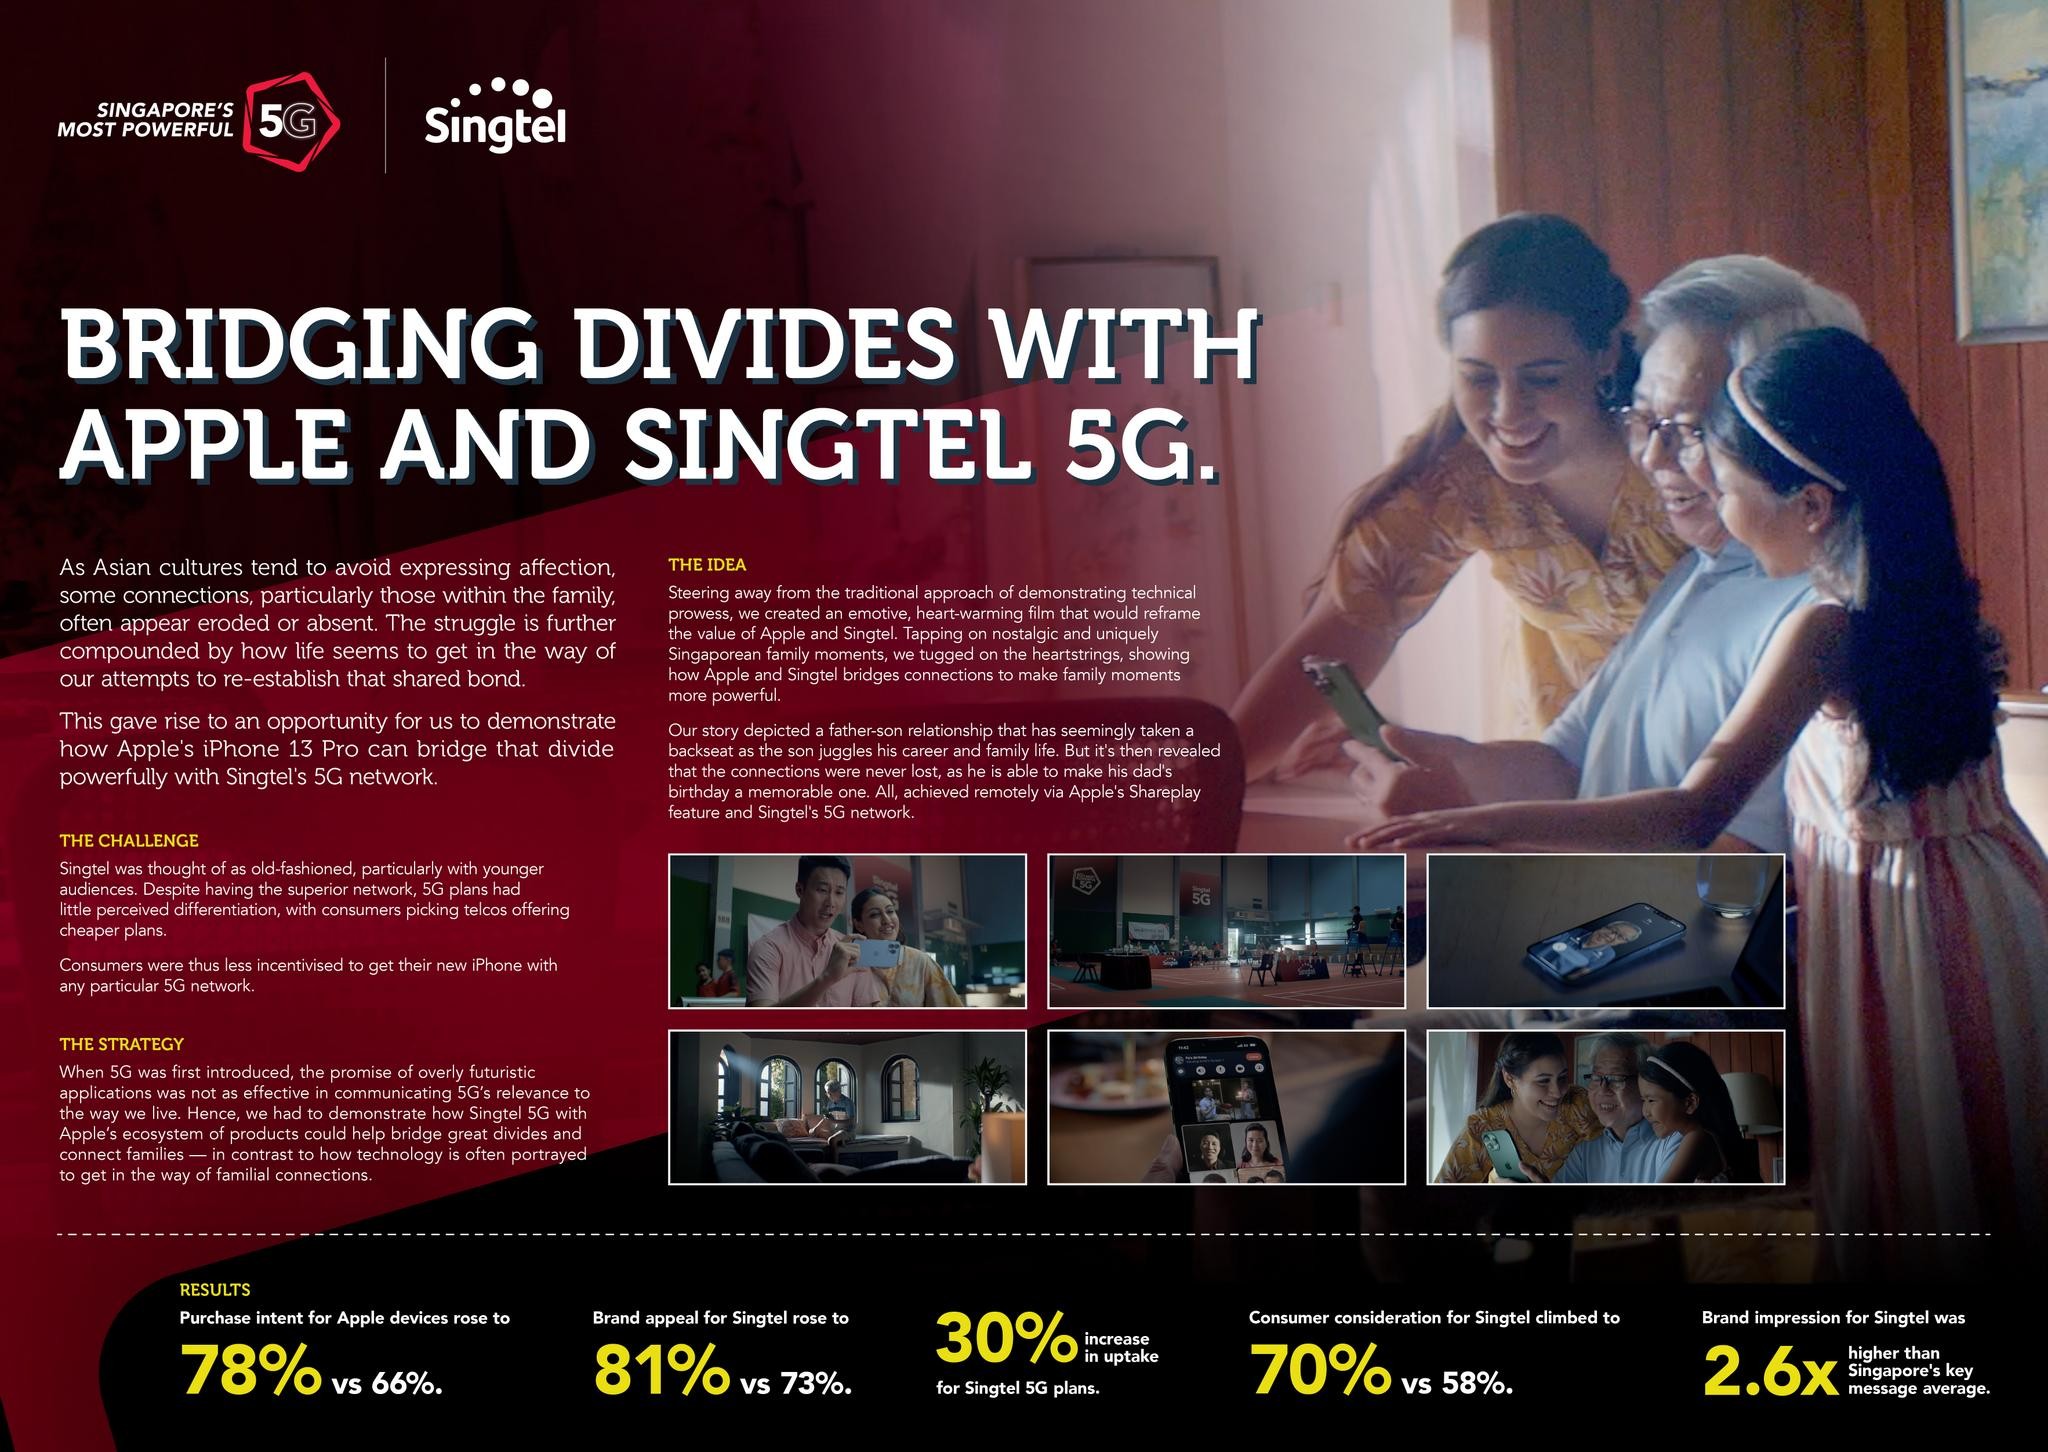 Family moments made powerful with Singtel 5G & iPhone 13 Pro